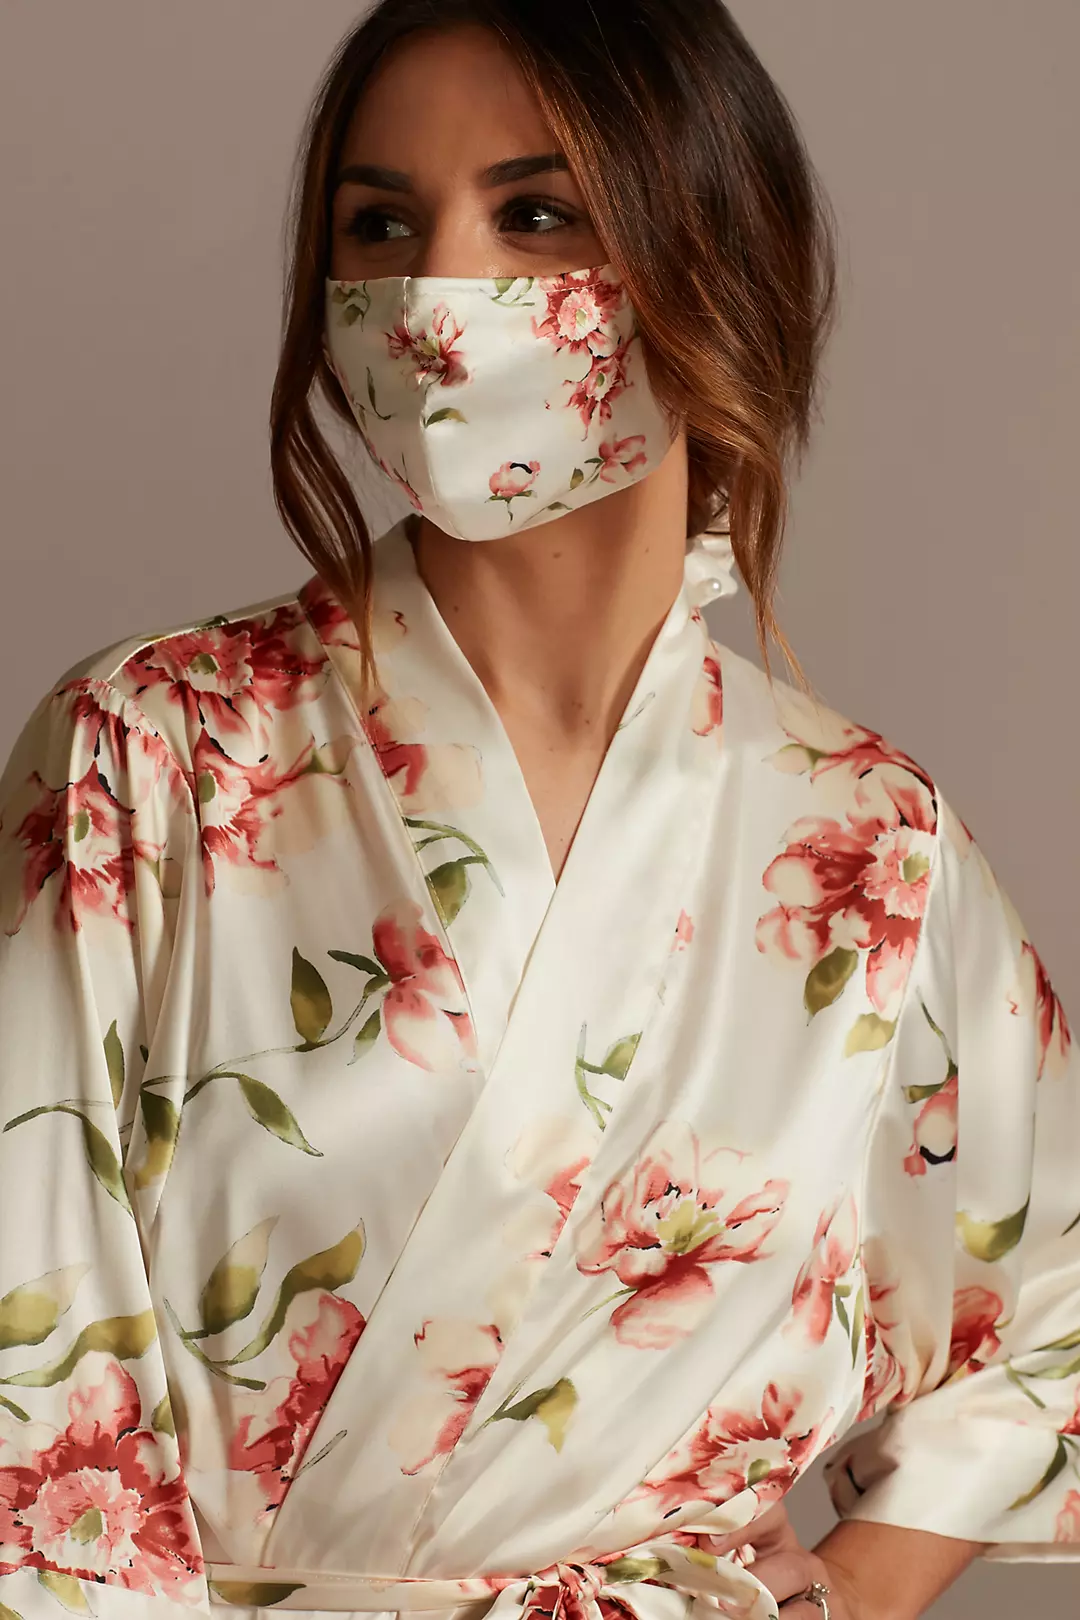 Fresh Floral Face Mask with Adjustable Ear Loops Image